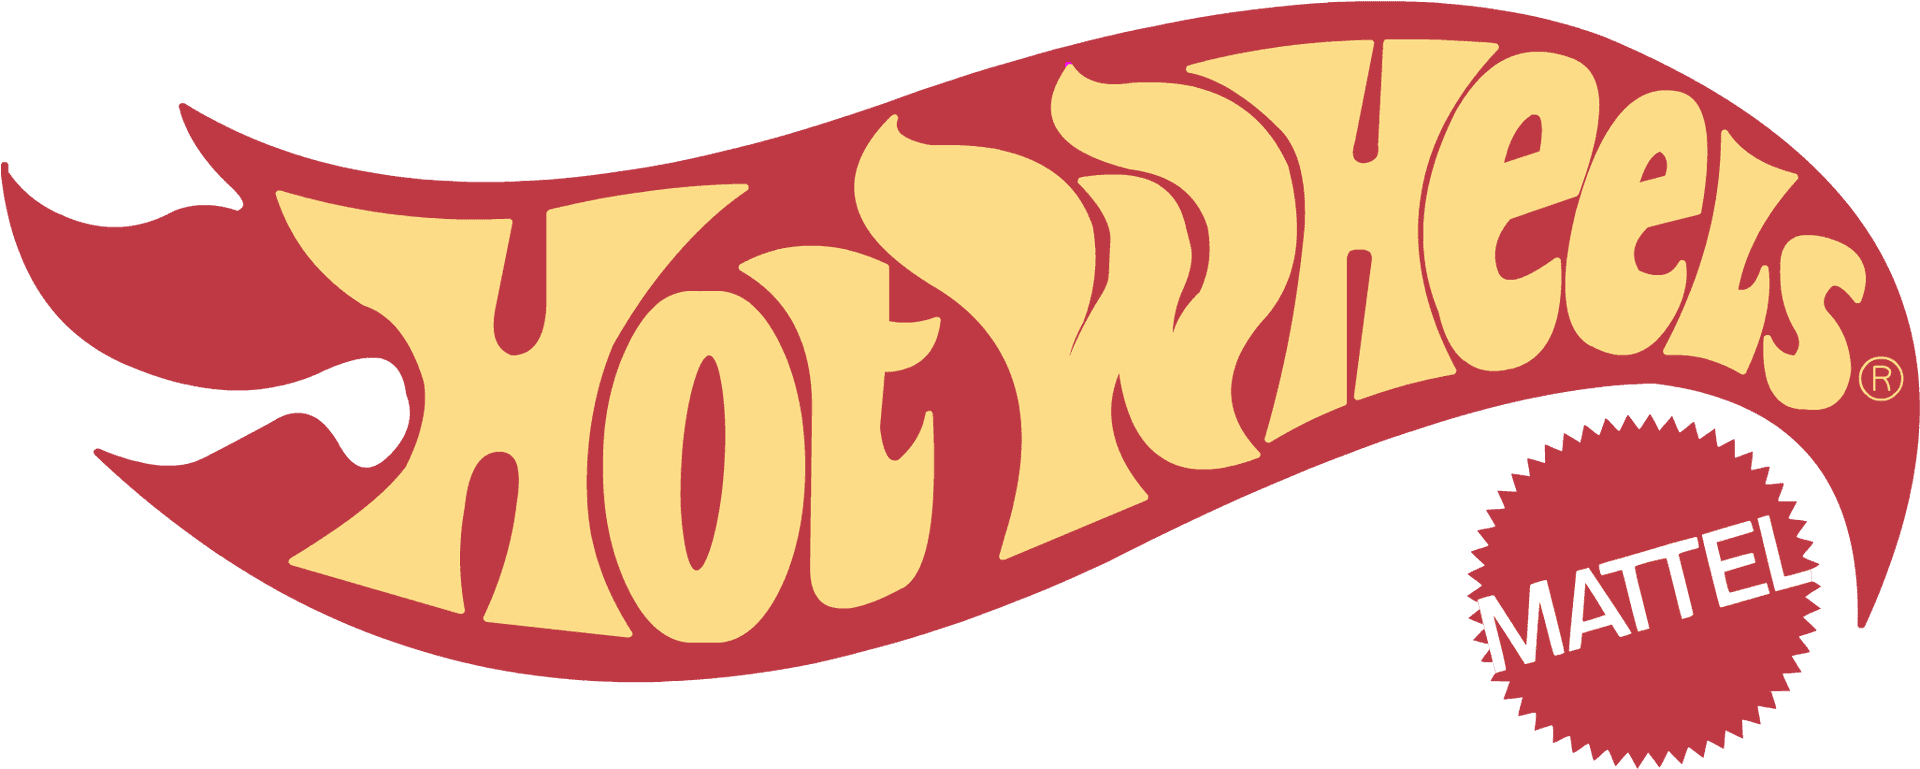 Hot Wheels Logowith Mattel Seal.png PNG